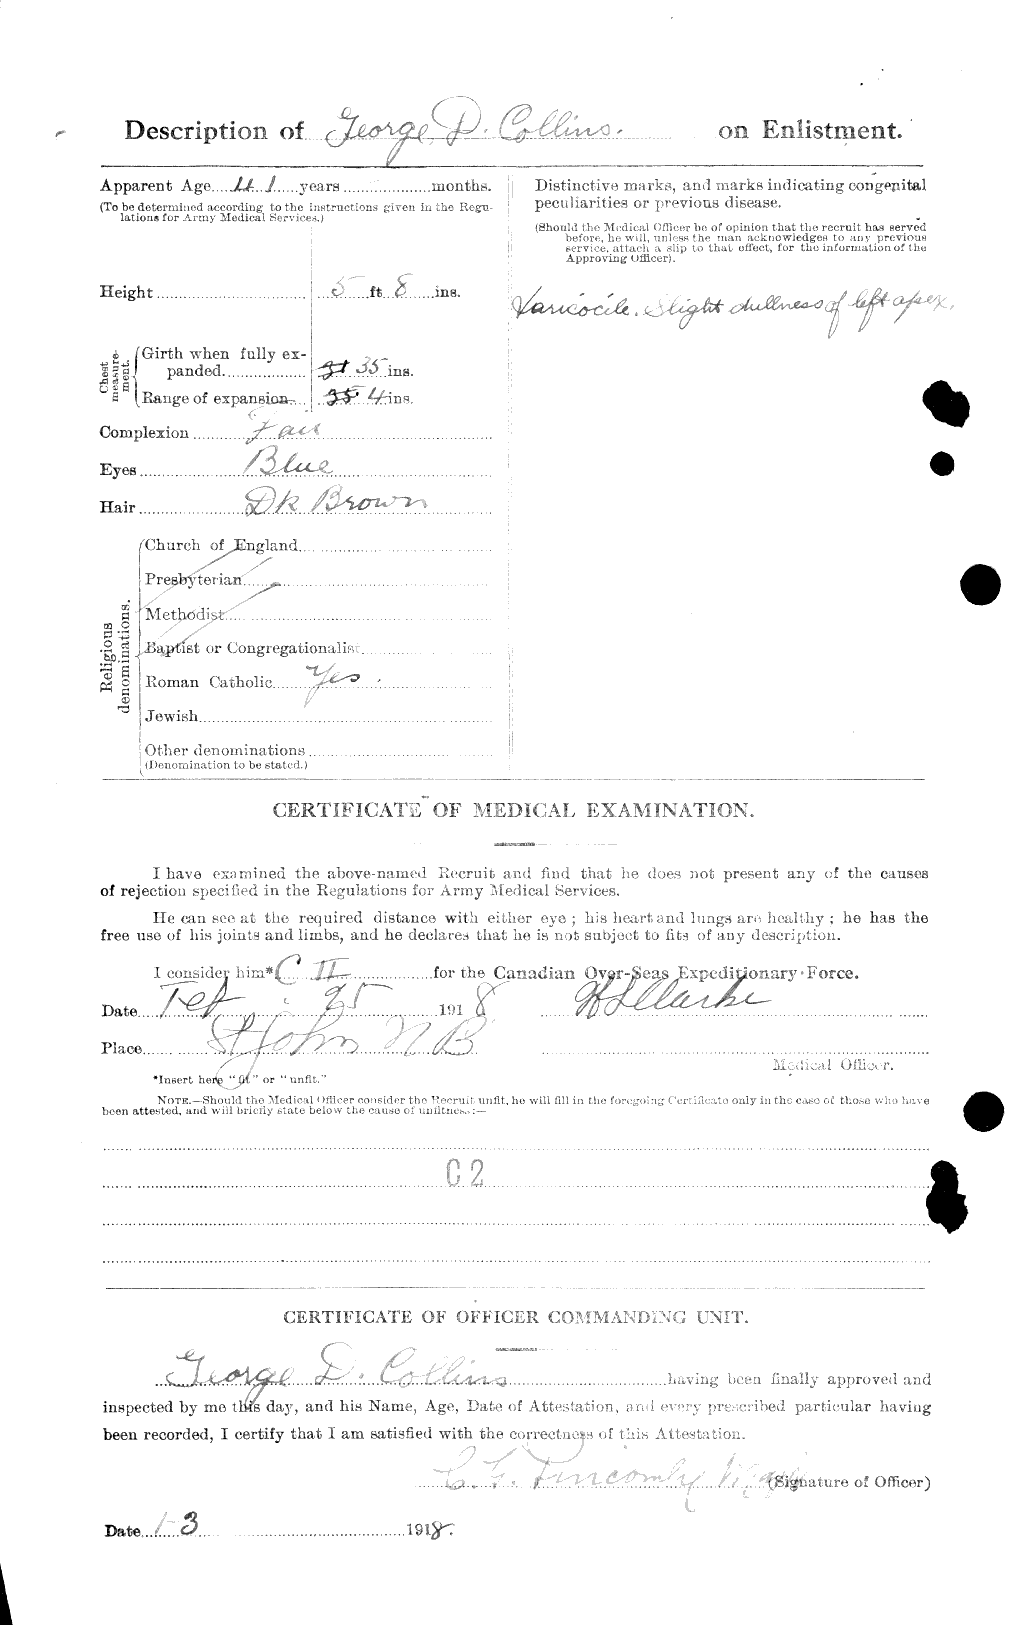 Personnel Records of the First World War - CEF 037859b